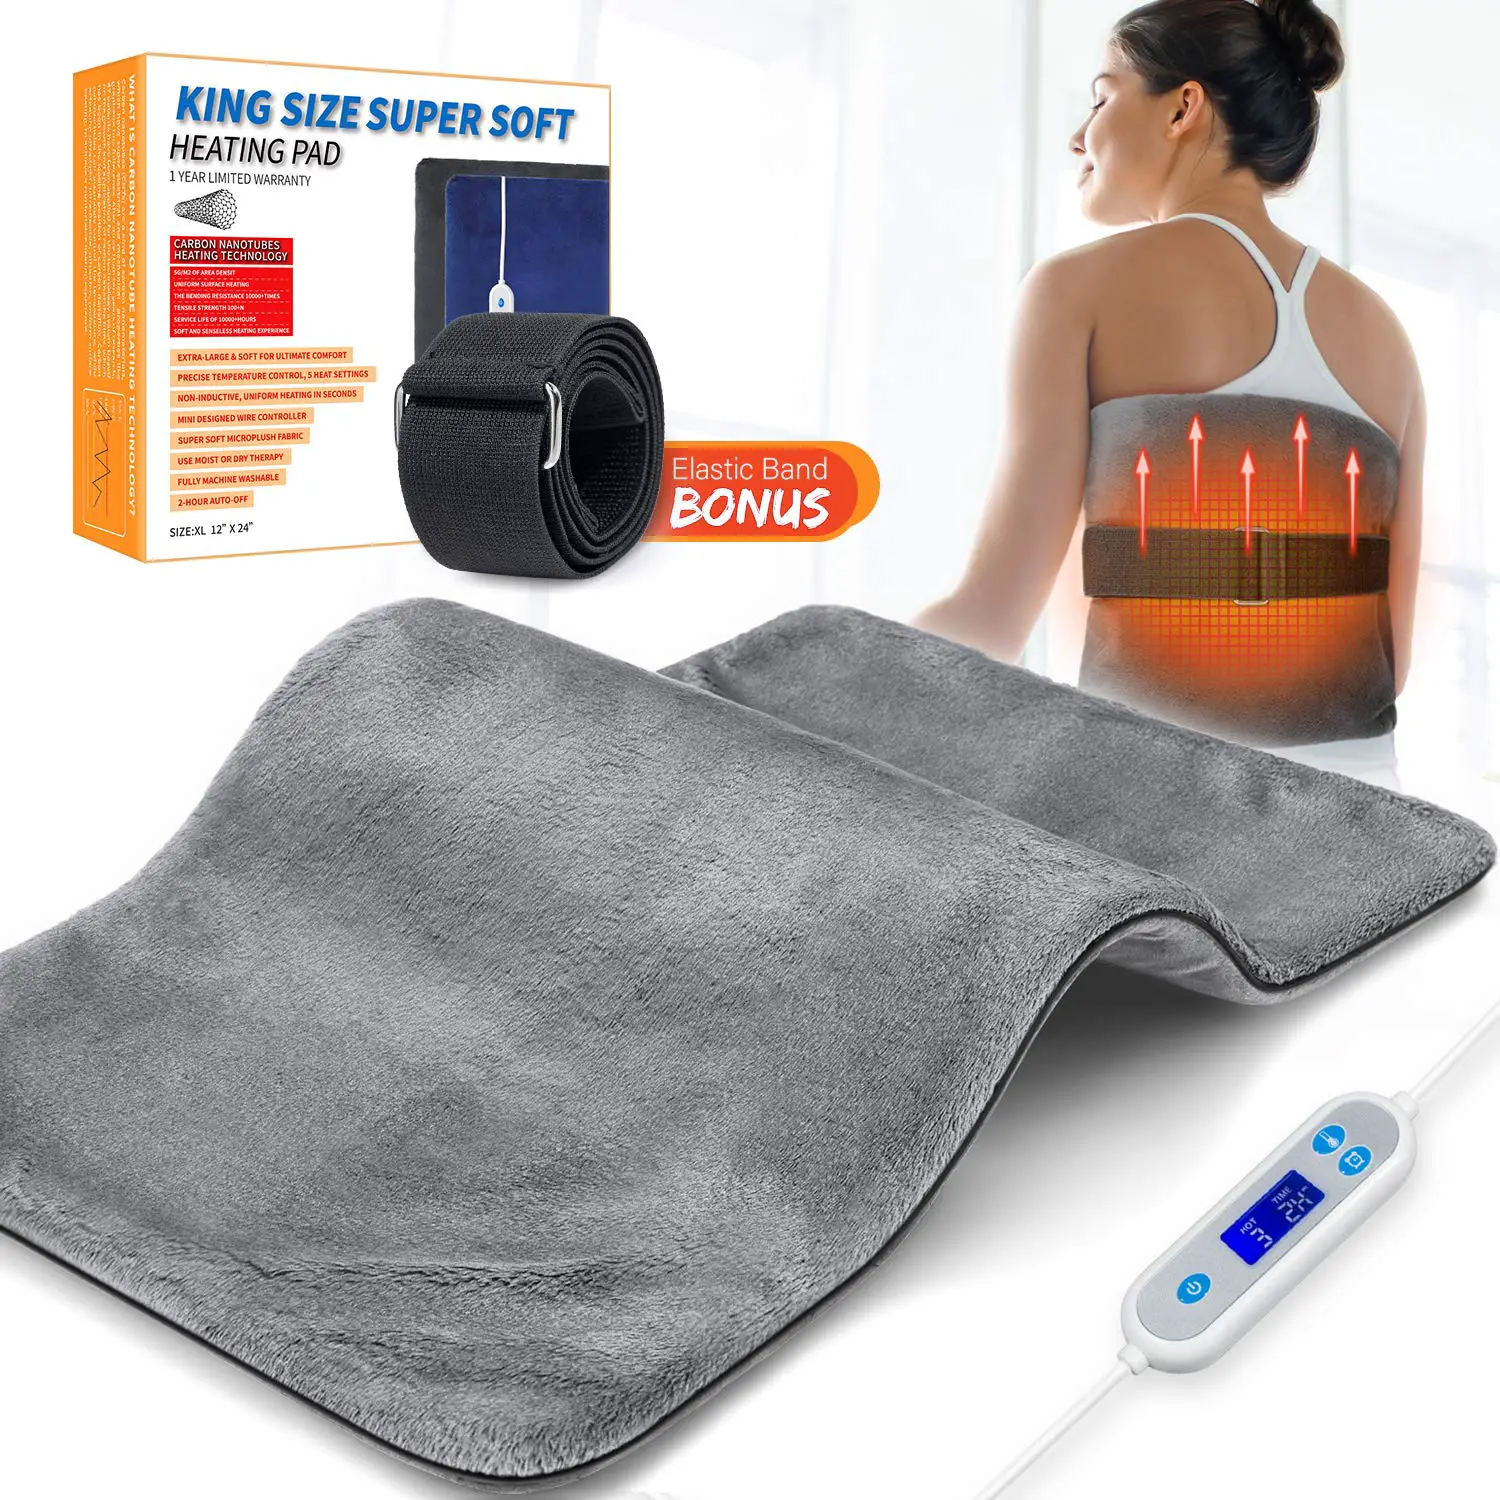 The 10 Best 12 Volt Heating Pads For Back Pain